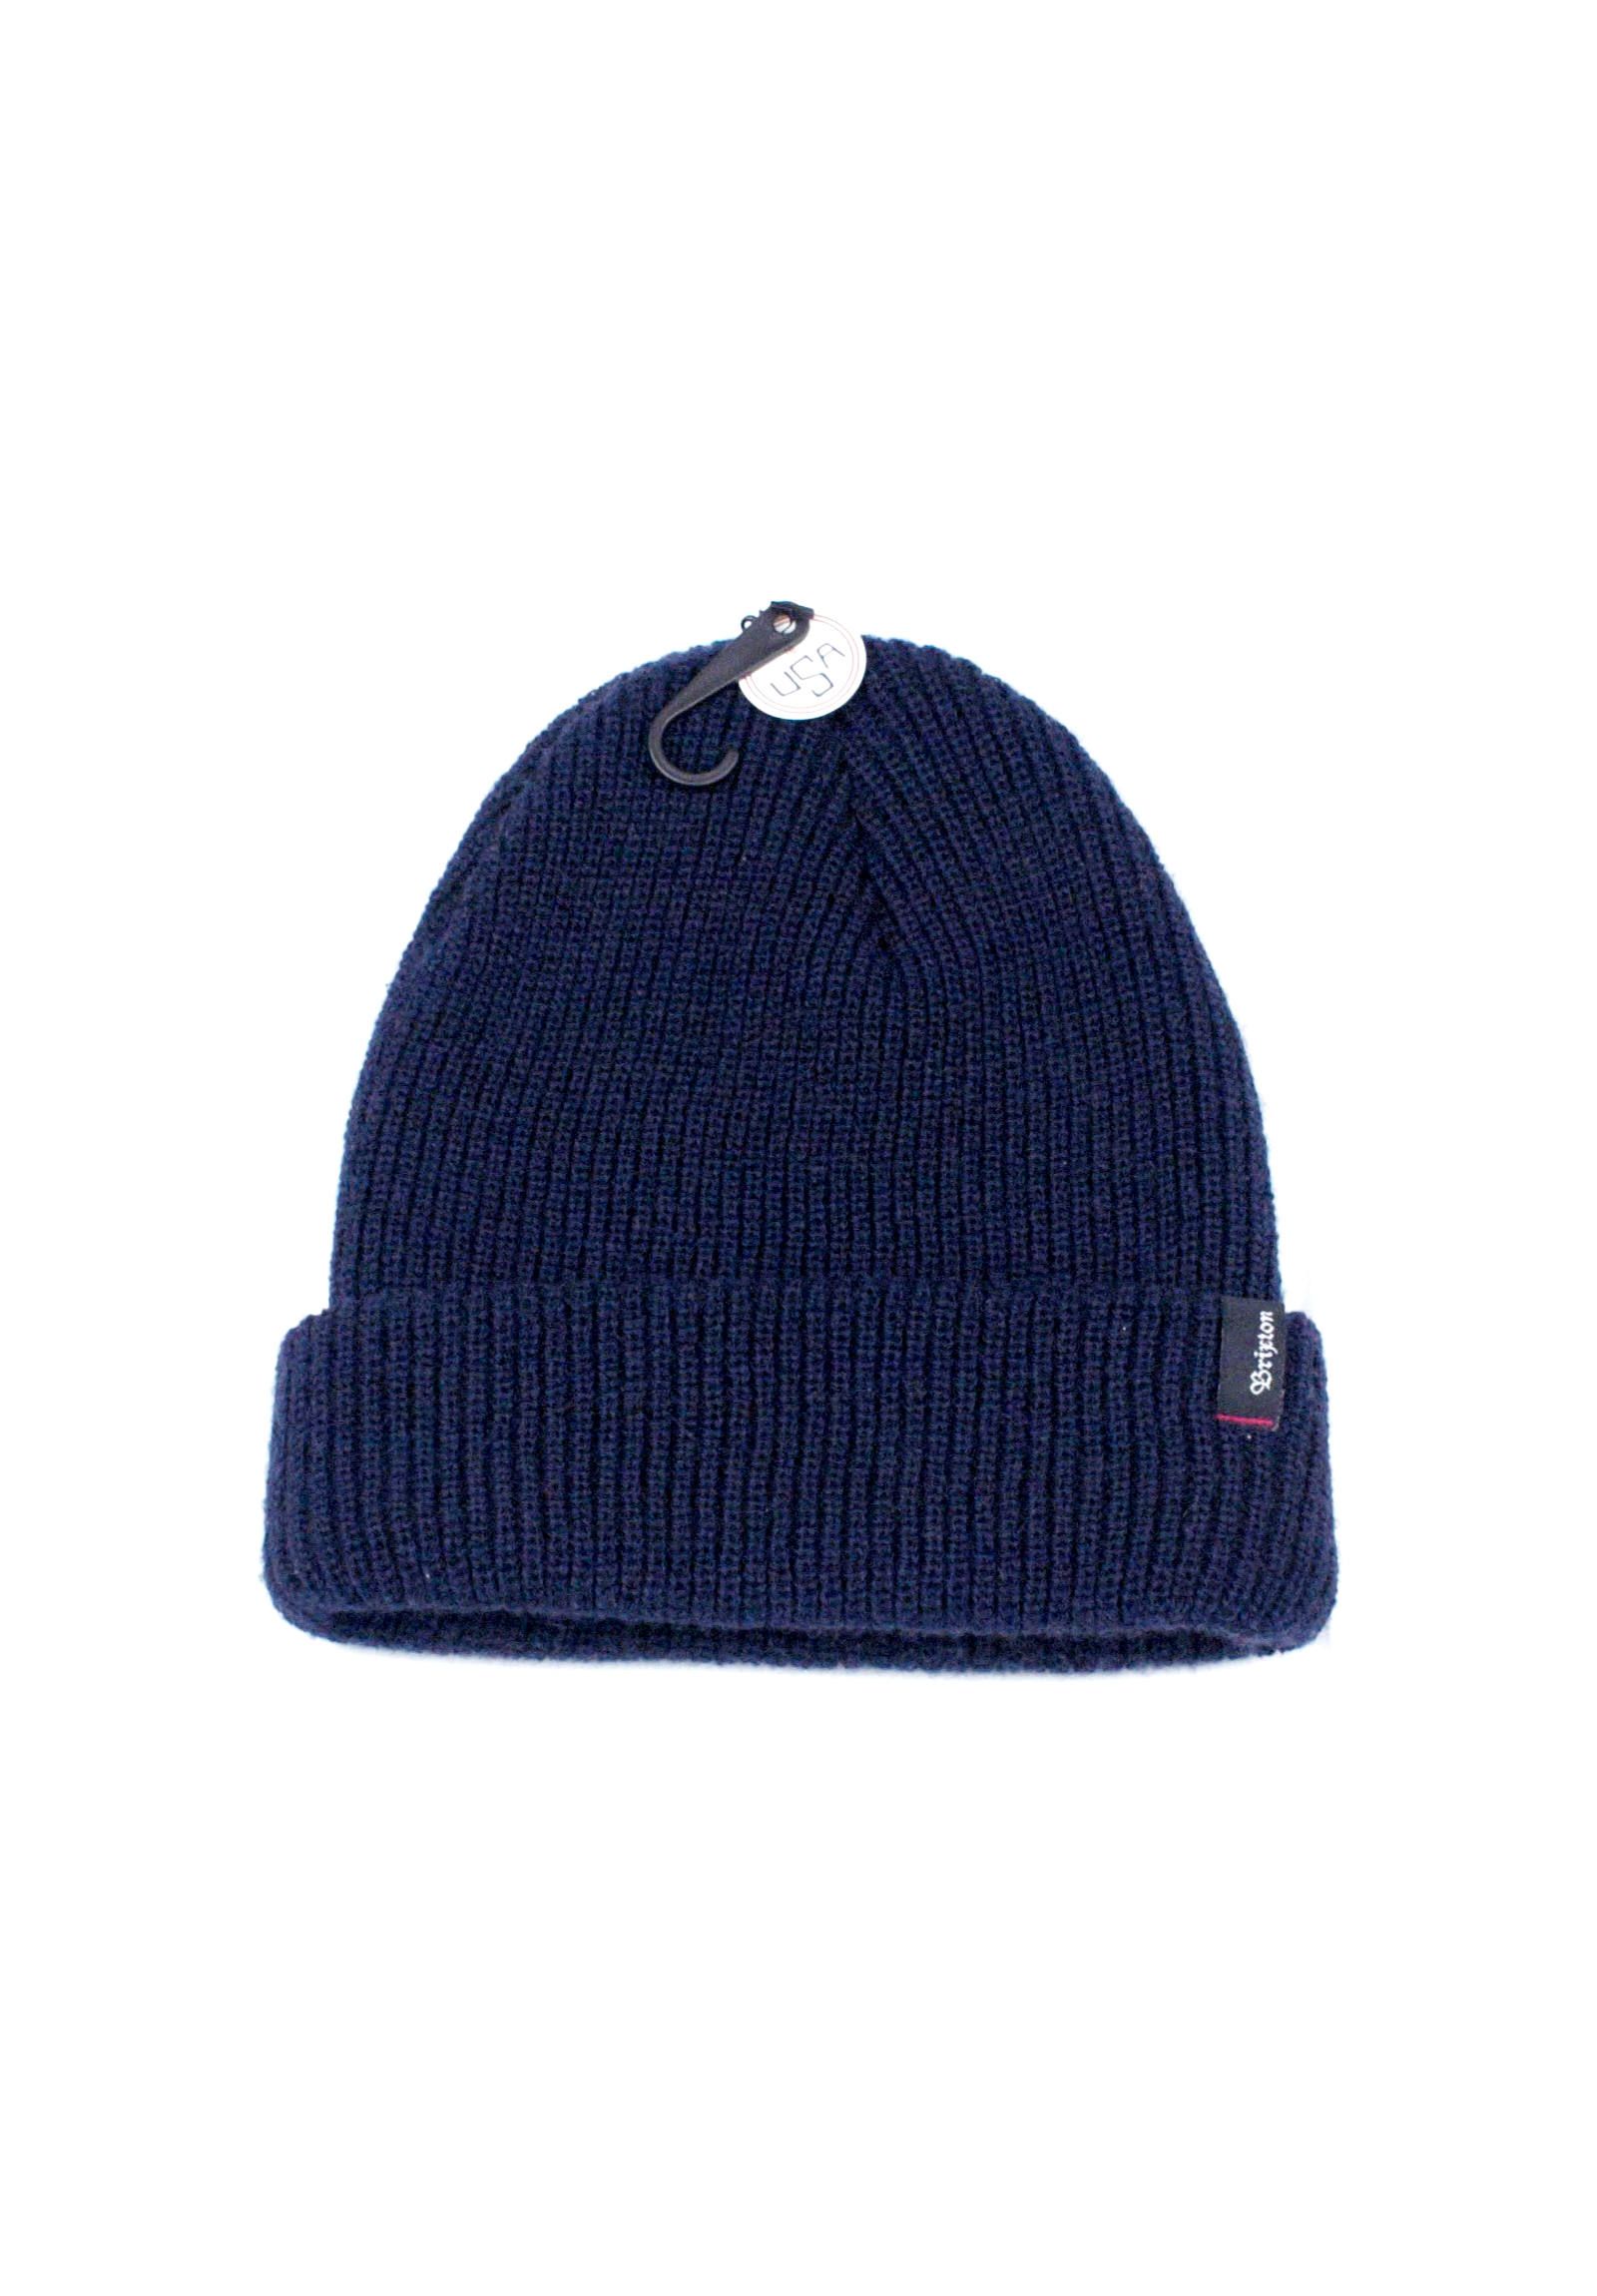 BRIXTON - ニットキャップ Heist-Navy- | FROG's TAIL